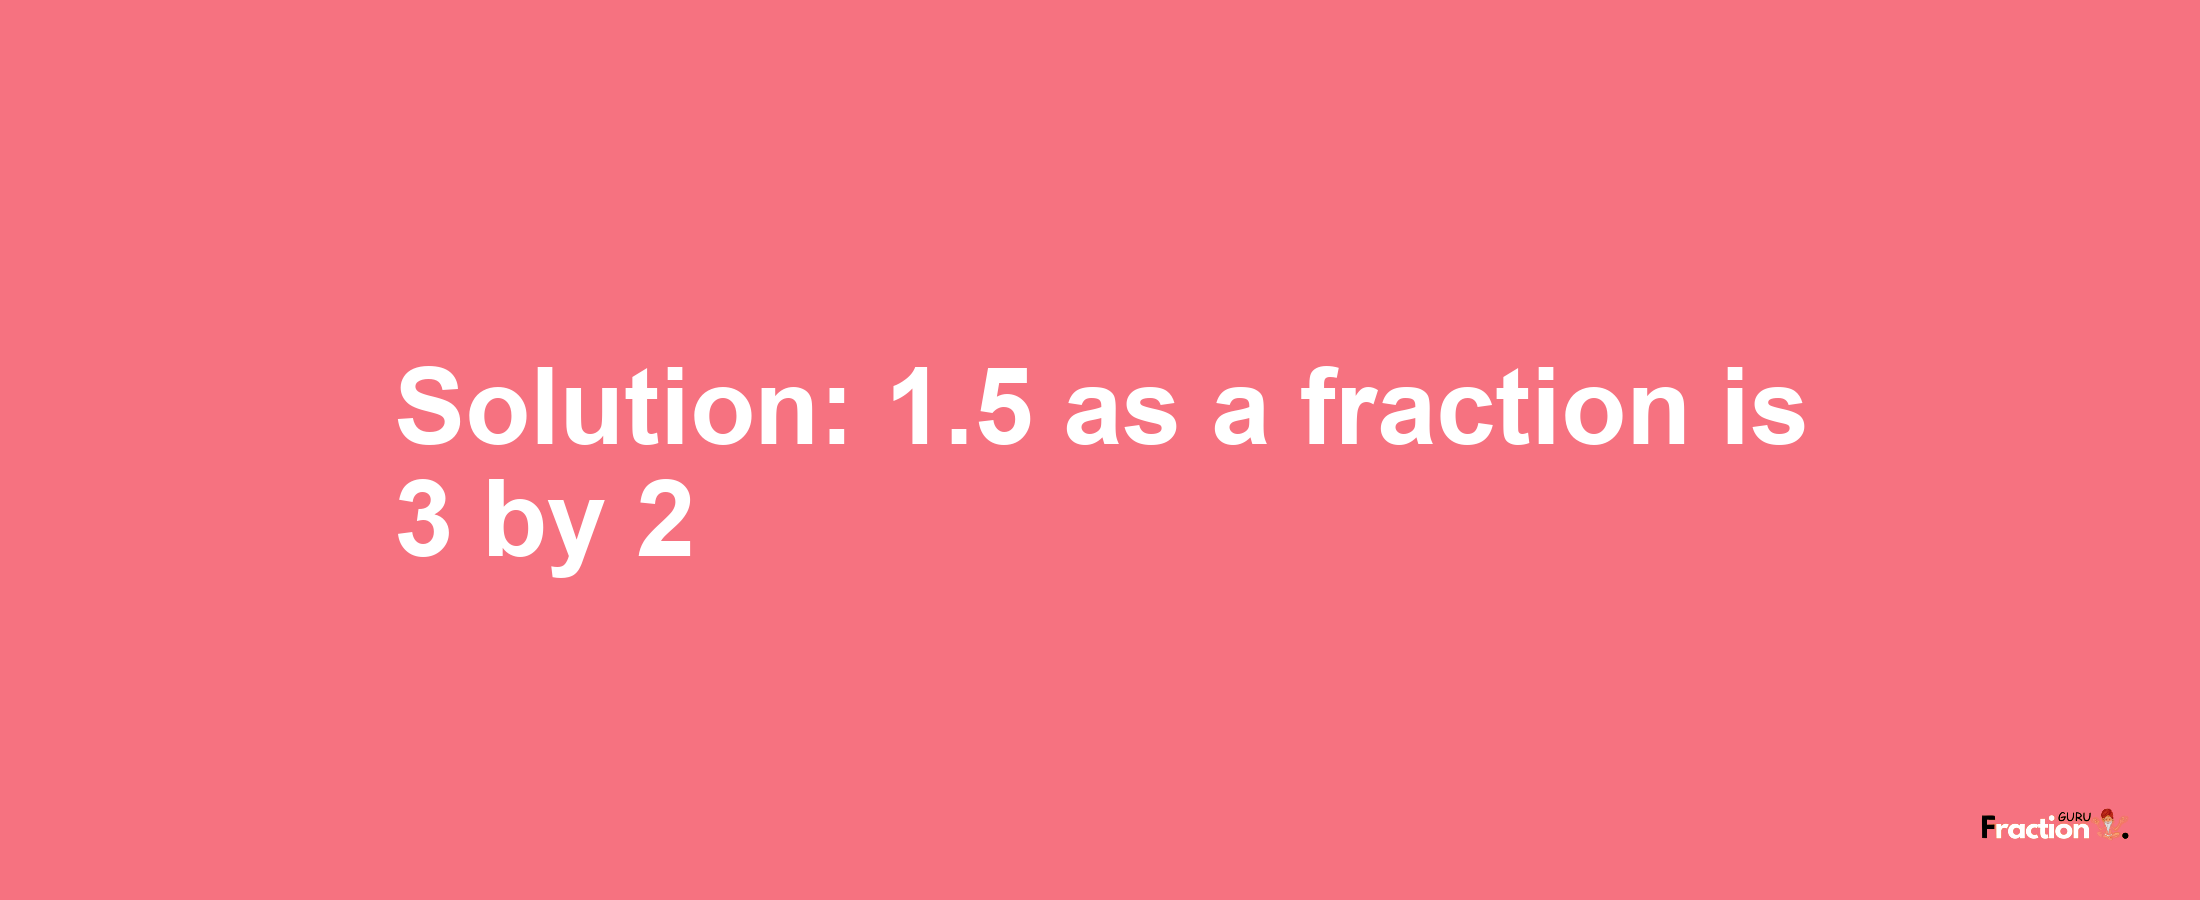 Solution:1.5 as a fraction is 3/2